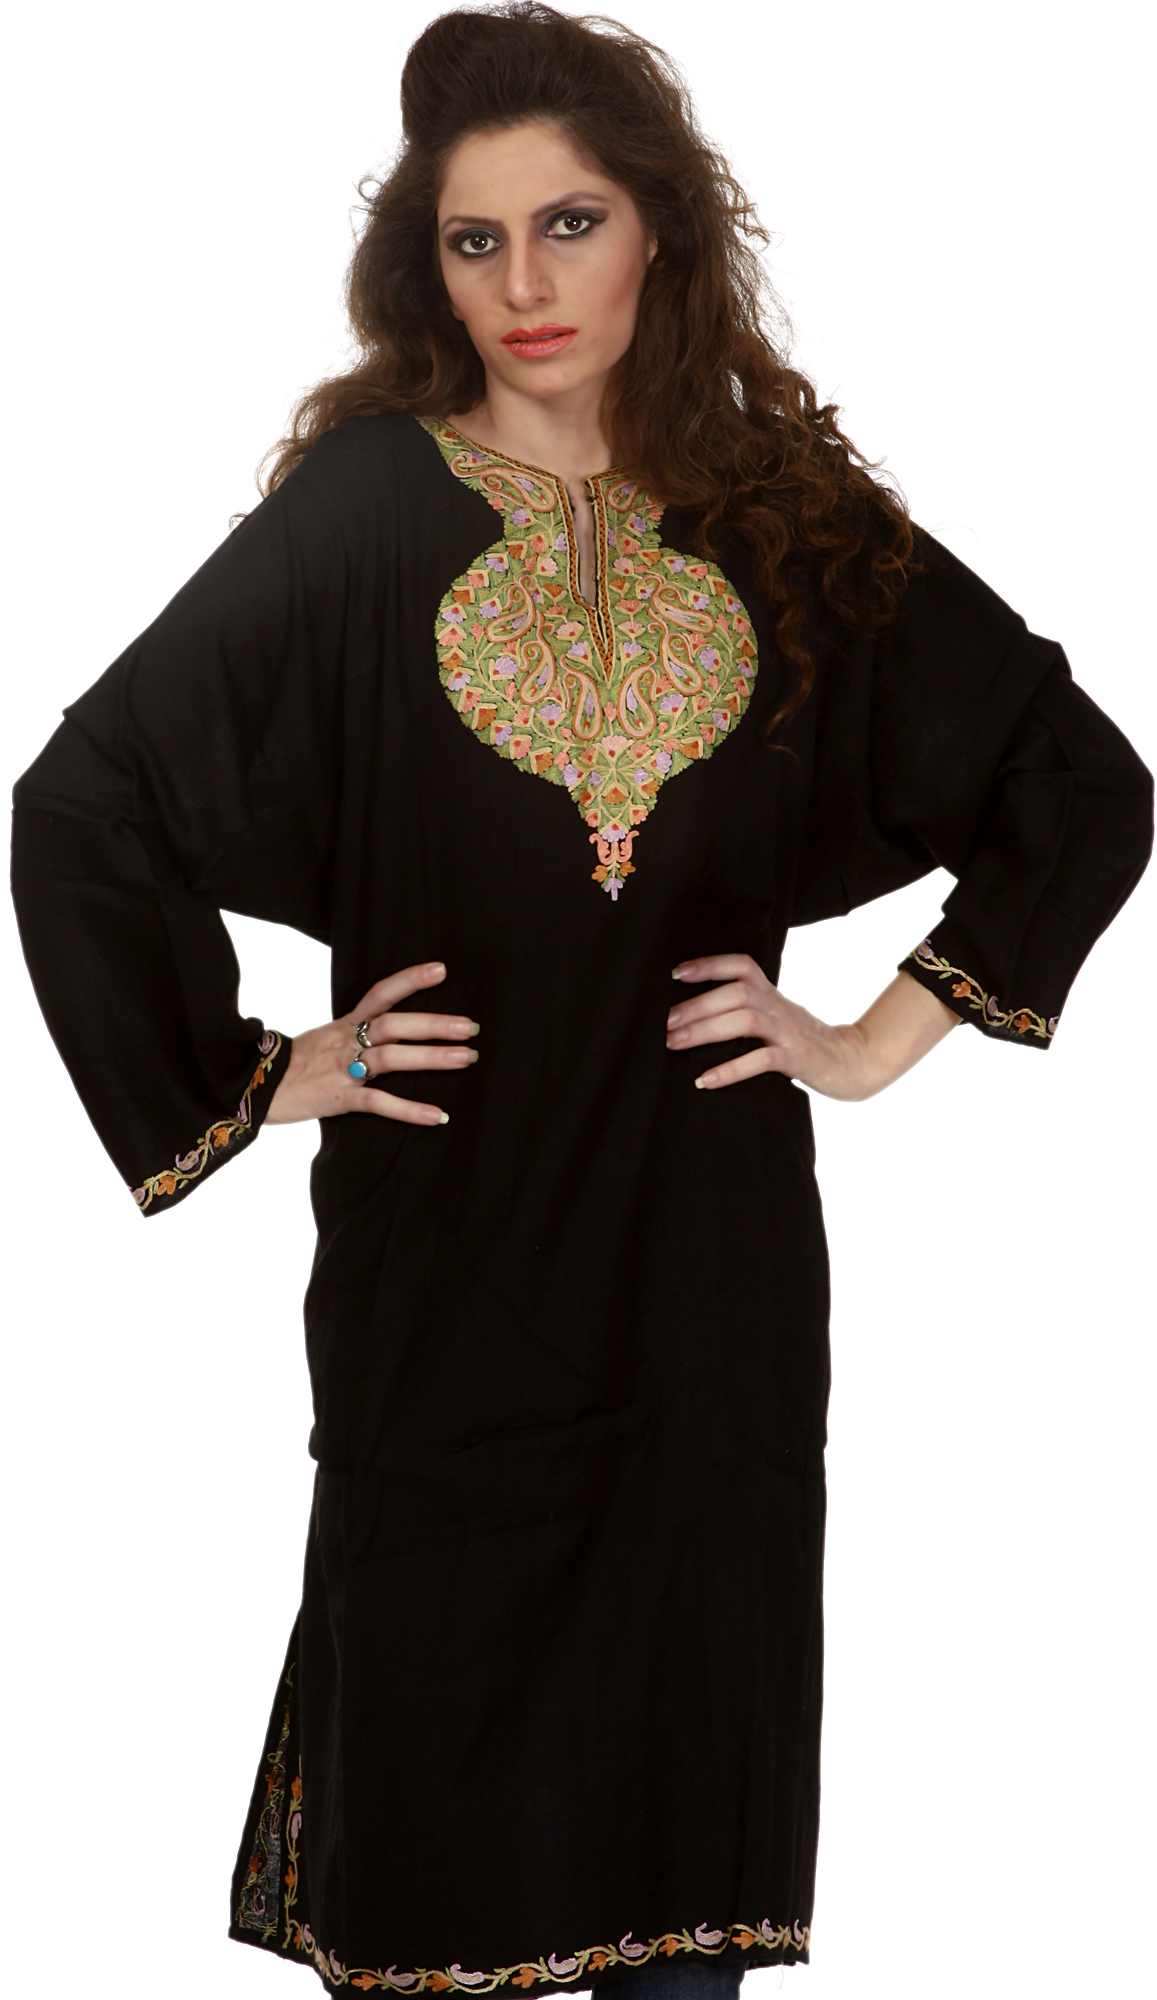 Black Kashmiri Phiran with Hand-Embroidery on Neck | Exotic India Art